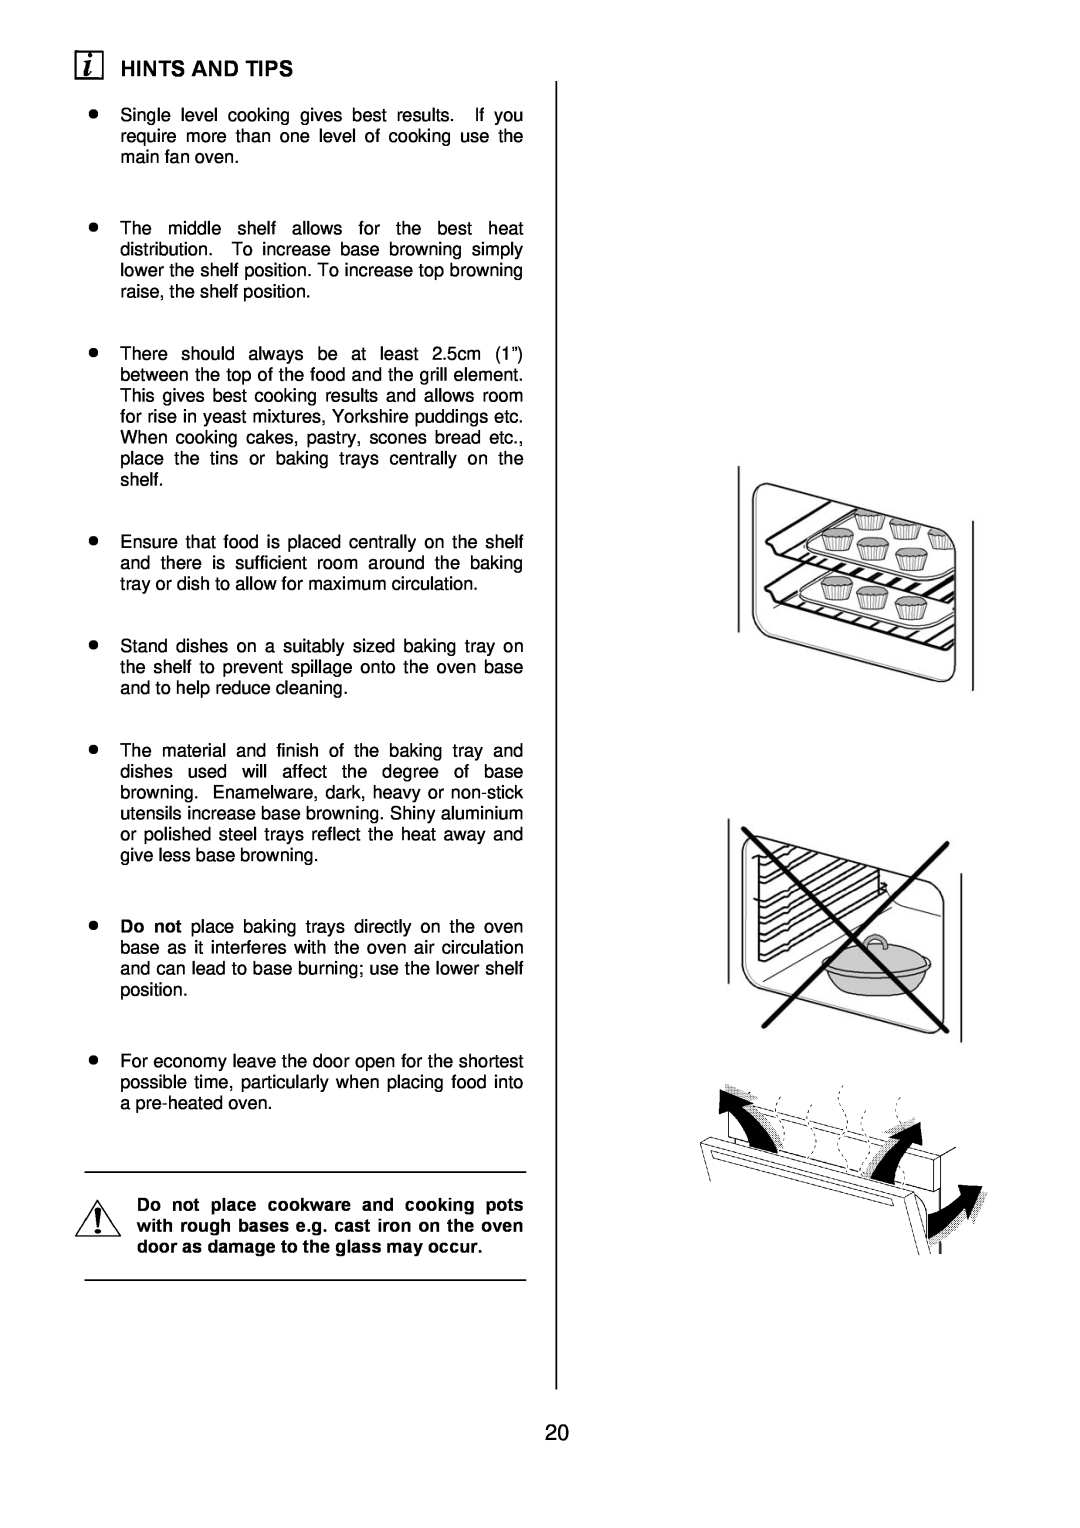 Electrolux D77000GF operating instructions Hints And Tips 